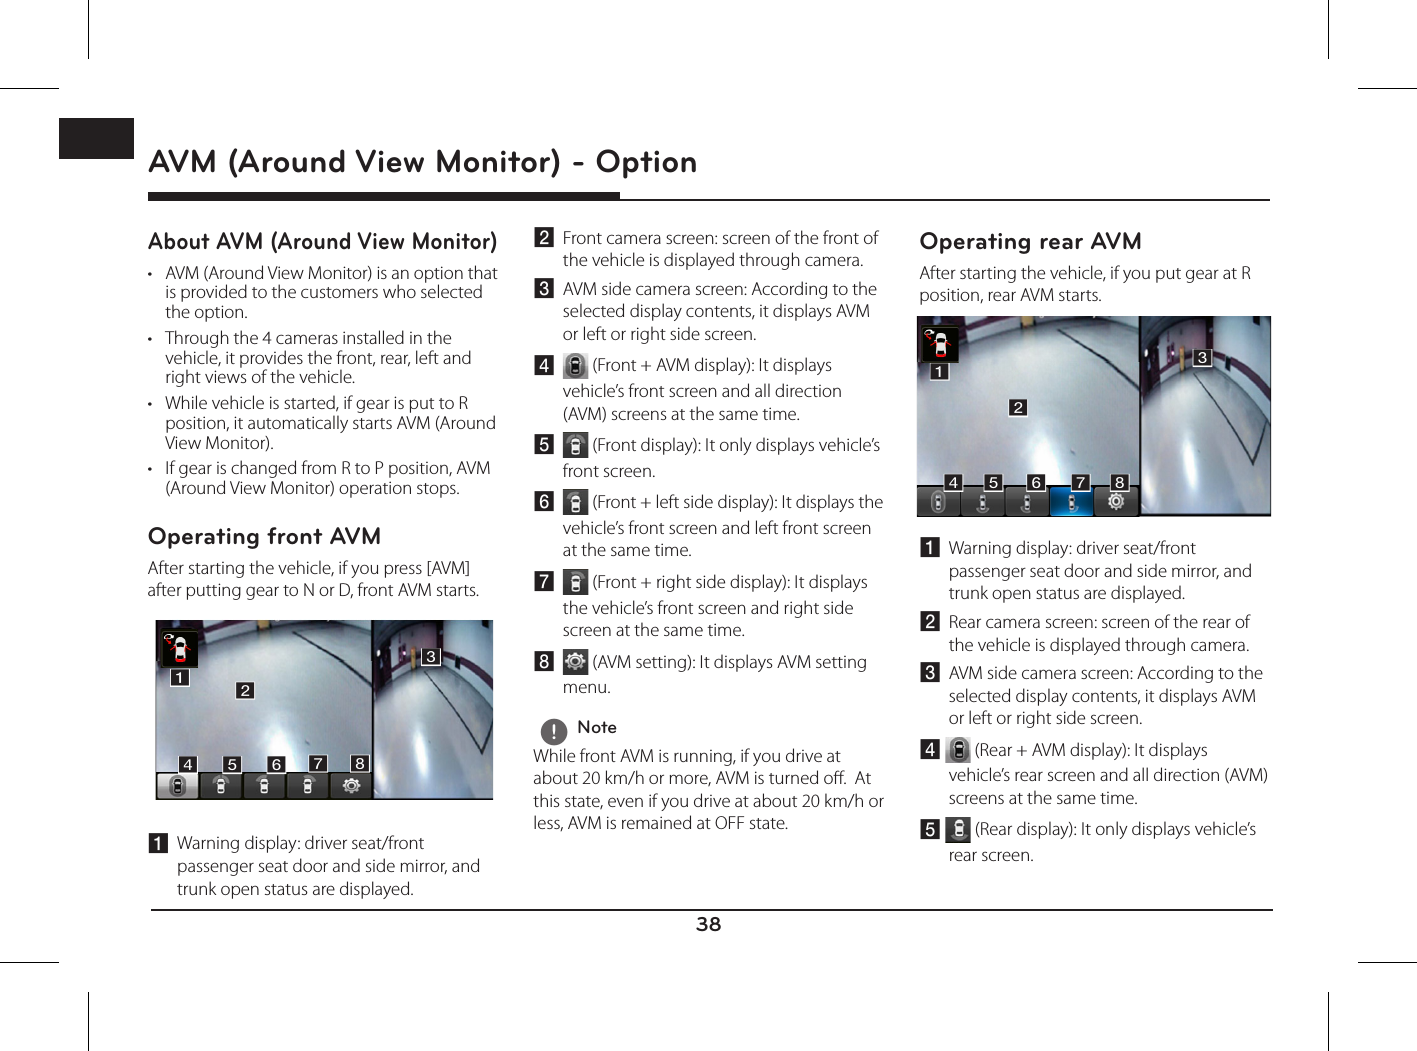 38ENGAVM (Around View Monitor) - OptionAVM (Around View Monitor) - OptionAbout AVM (Around View Monitor) • AVM (Around View Monitor) is an option that is provided to the customers who selected the option. • Through the 4 cameras installed in the vehicle, it provides the front, rear, left and right views of the vehicle.• While vehicle is started, if gear is put to R position, it automatically starts AVM (Around View Monitor).• If gear is changed from R to P position, AVM (Around View Monitor) operation stops. Operating front AVM After starting the vehicle, if you press [AVM] after putting gear to N or D, front AVM starts. a  Warning display: driver seat/front passenger seat door and side mirror, and trunk open status are displayed.b  Front camera screen: screen of the front of the vehicle is displayed through camera. c  AVM side camera screen: According to the selected display contents, it displays AVM or left or right side screen.d   (Front + AVM display): It displays vehicle’s front screen and all direction (AVM) screens at the same time.e   (Front display): It only displays vehicle’s front screen.f  (Front + left side display): It displays the vehicle’s front screen and left front screen at the same time.g   (Front + right side display): It displays the vehicle’s front screen and right side screen at the same time.h   (AVM setting): It displays AVM setting menu.  , NoteWhile front AVM is running, if you drive at about 20 km/h or more, AVM is turned o.  At this state, even if you drive at about 20 km/h or less, AVM is remained at OFF state. Operating rear AVM After starting the vehicle, if you put gear at R position, rear AVM starts. a  Warning display: driver seat/front passenger seat door and side mirror, and trunk open status are displayed.b  Rear camera screen: screen of the rear of the vehicle is displayed through camera.c  AVM side camera screen: According to the selected display contents, it displays AVM or left or right side screen.d   (Rear + AVM display): It displays vehicle’s rear screen and all direction (AVM) screens at the same time.e   (Rear display): It only displays vehicle’s rear screen.d e f g habcd e f g habc